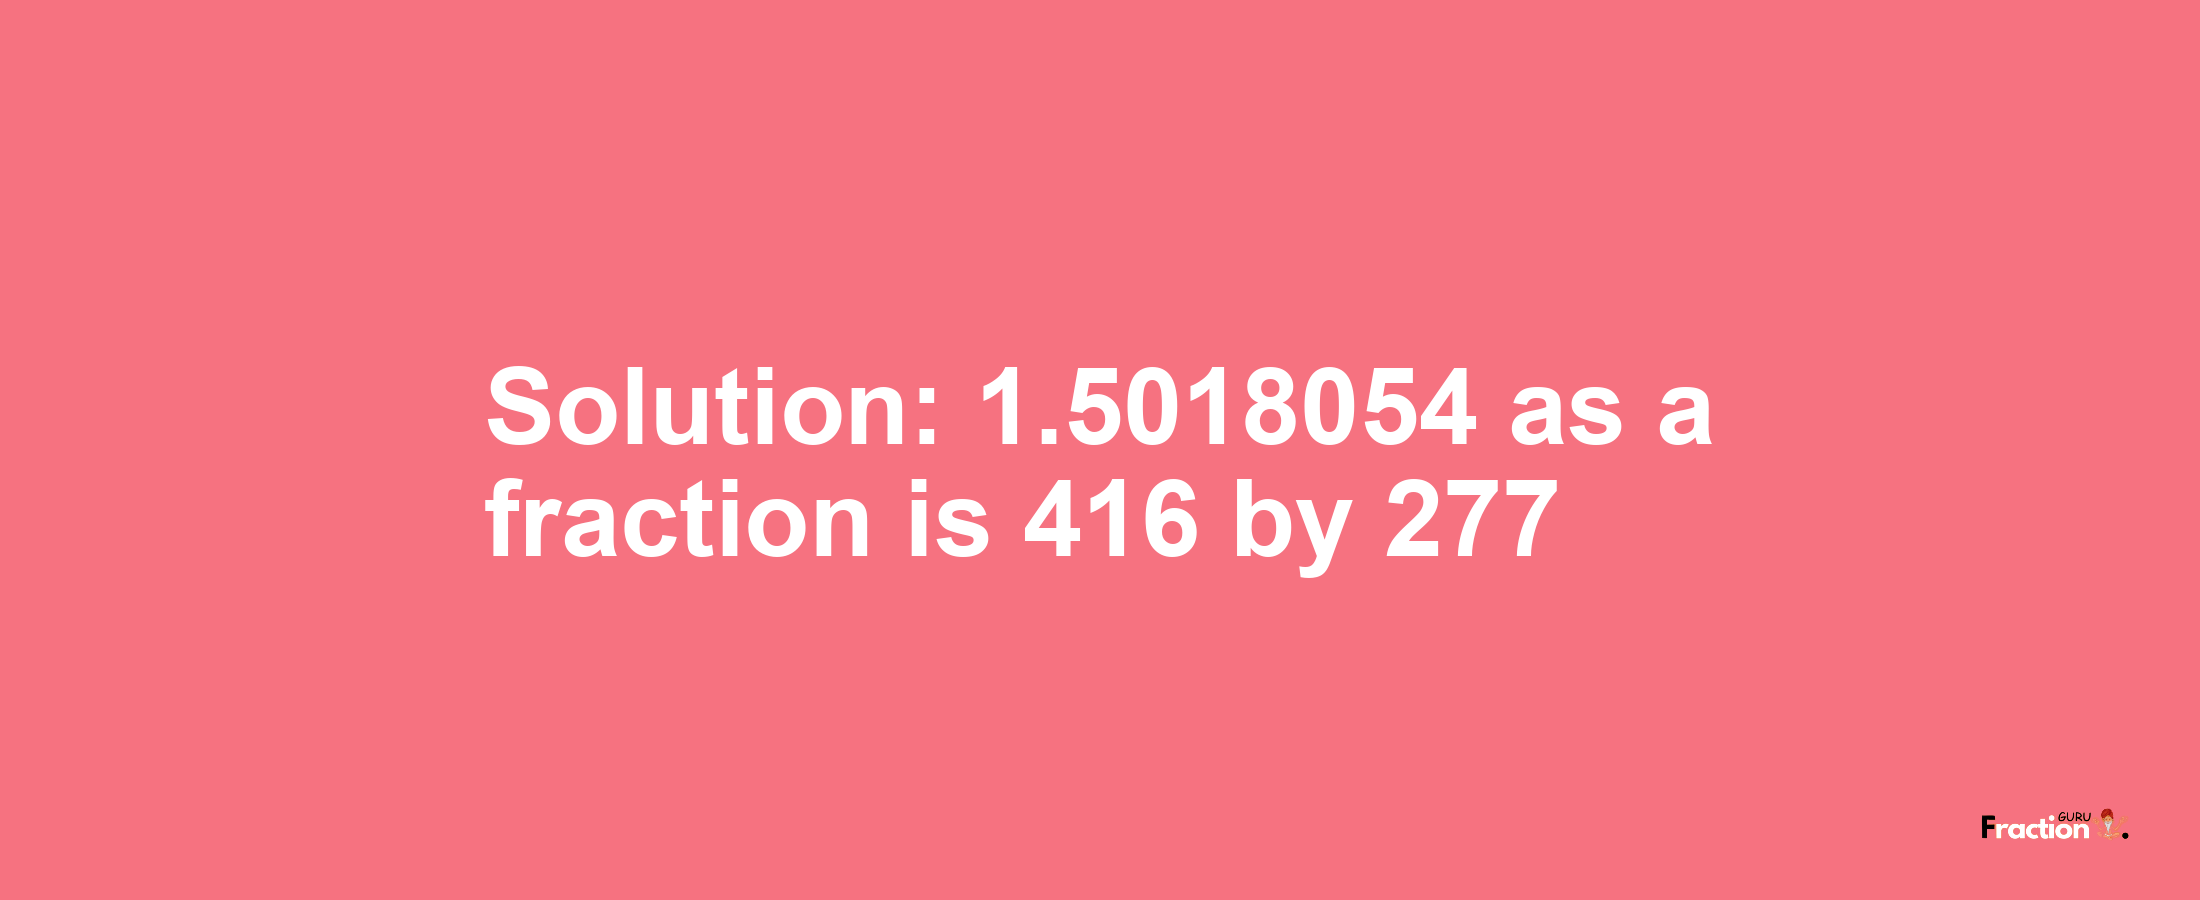 Solution:1.5018054 as a fraction is 416/277